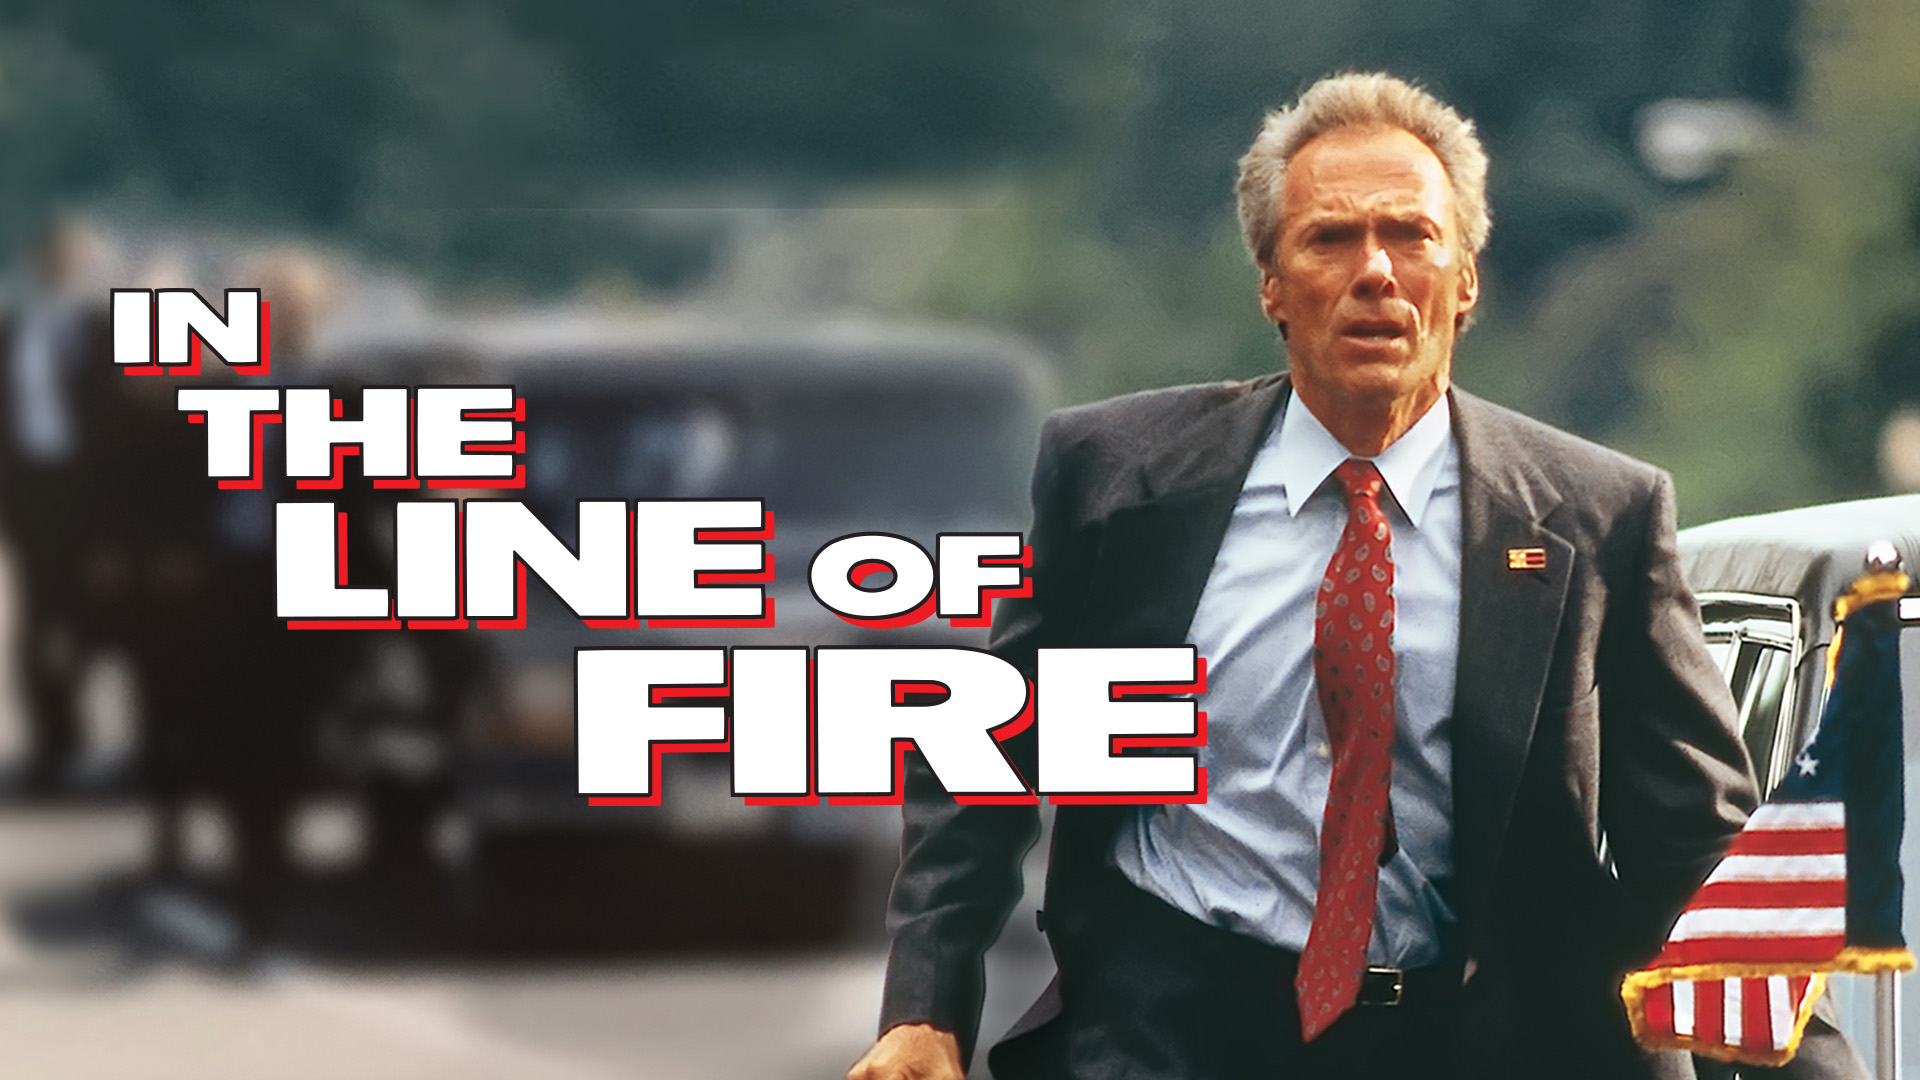 Watch In the Line of Fire Online | Stream Full Movies